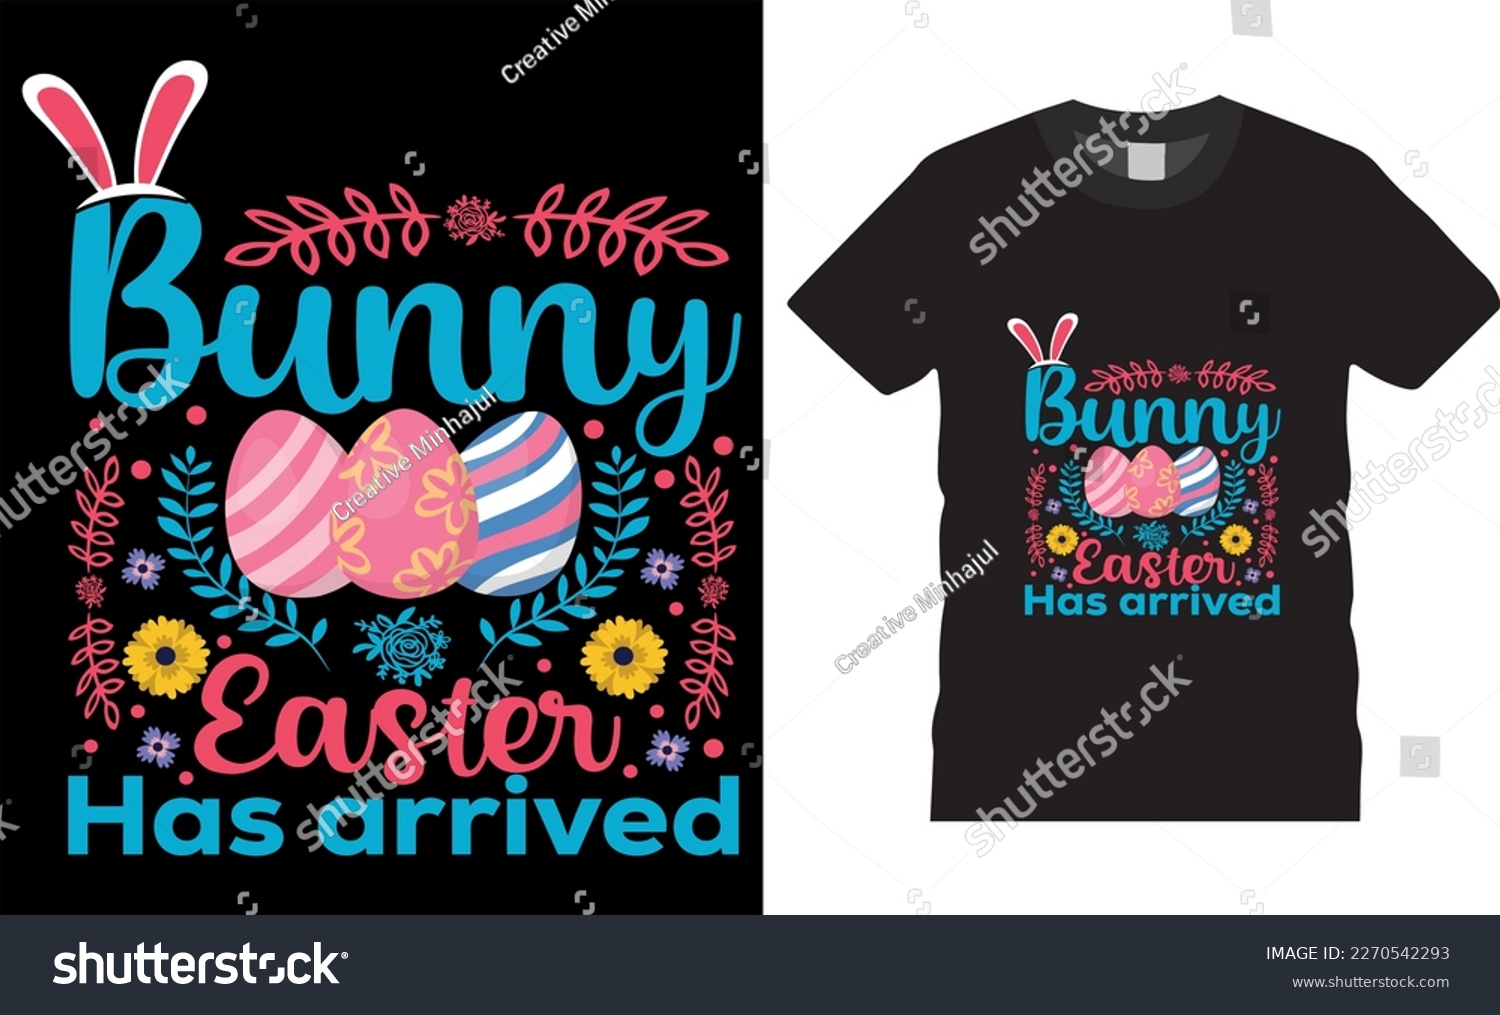 SVG of Happy easter rabbit, bunny tshirt vector design template.Bunny easter has arrived t-shirt design.Ready to print for apparel, poster, mug and greeting plate illustration. svg